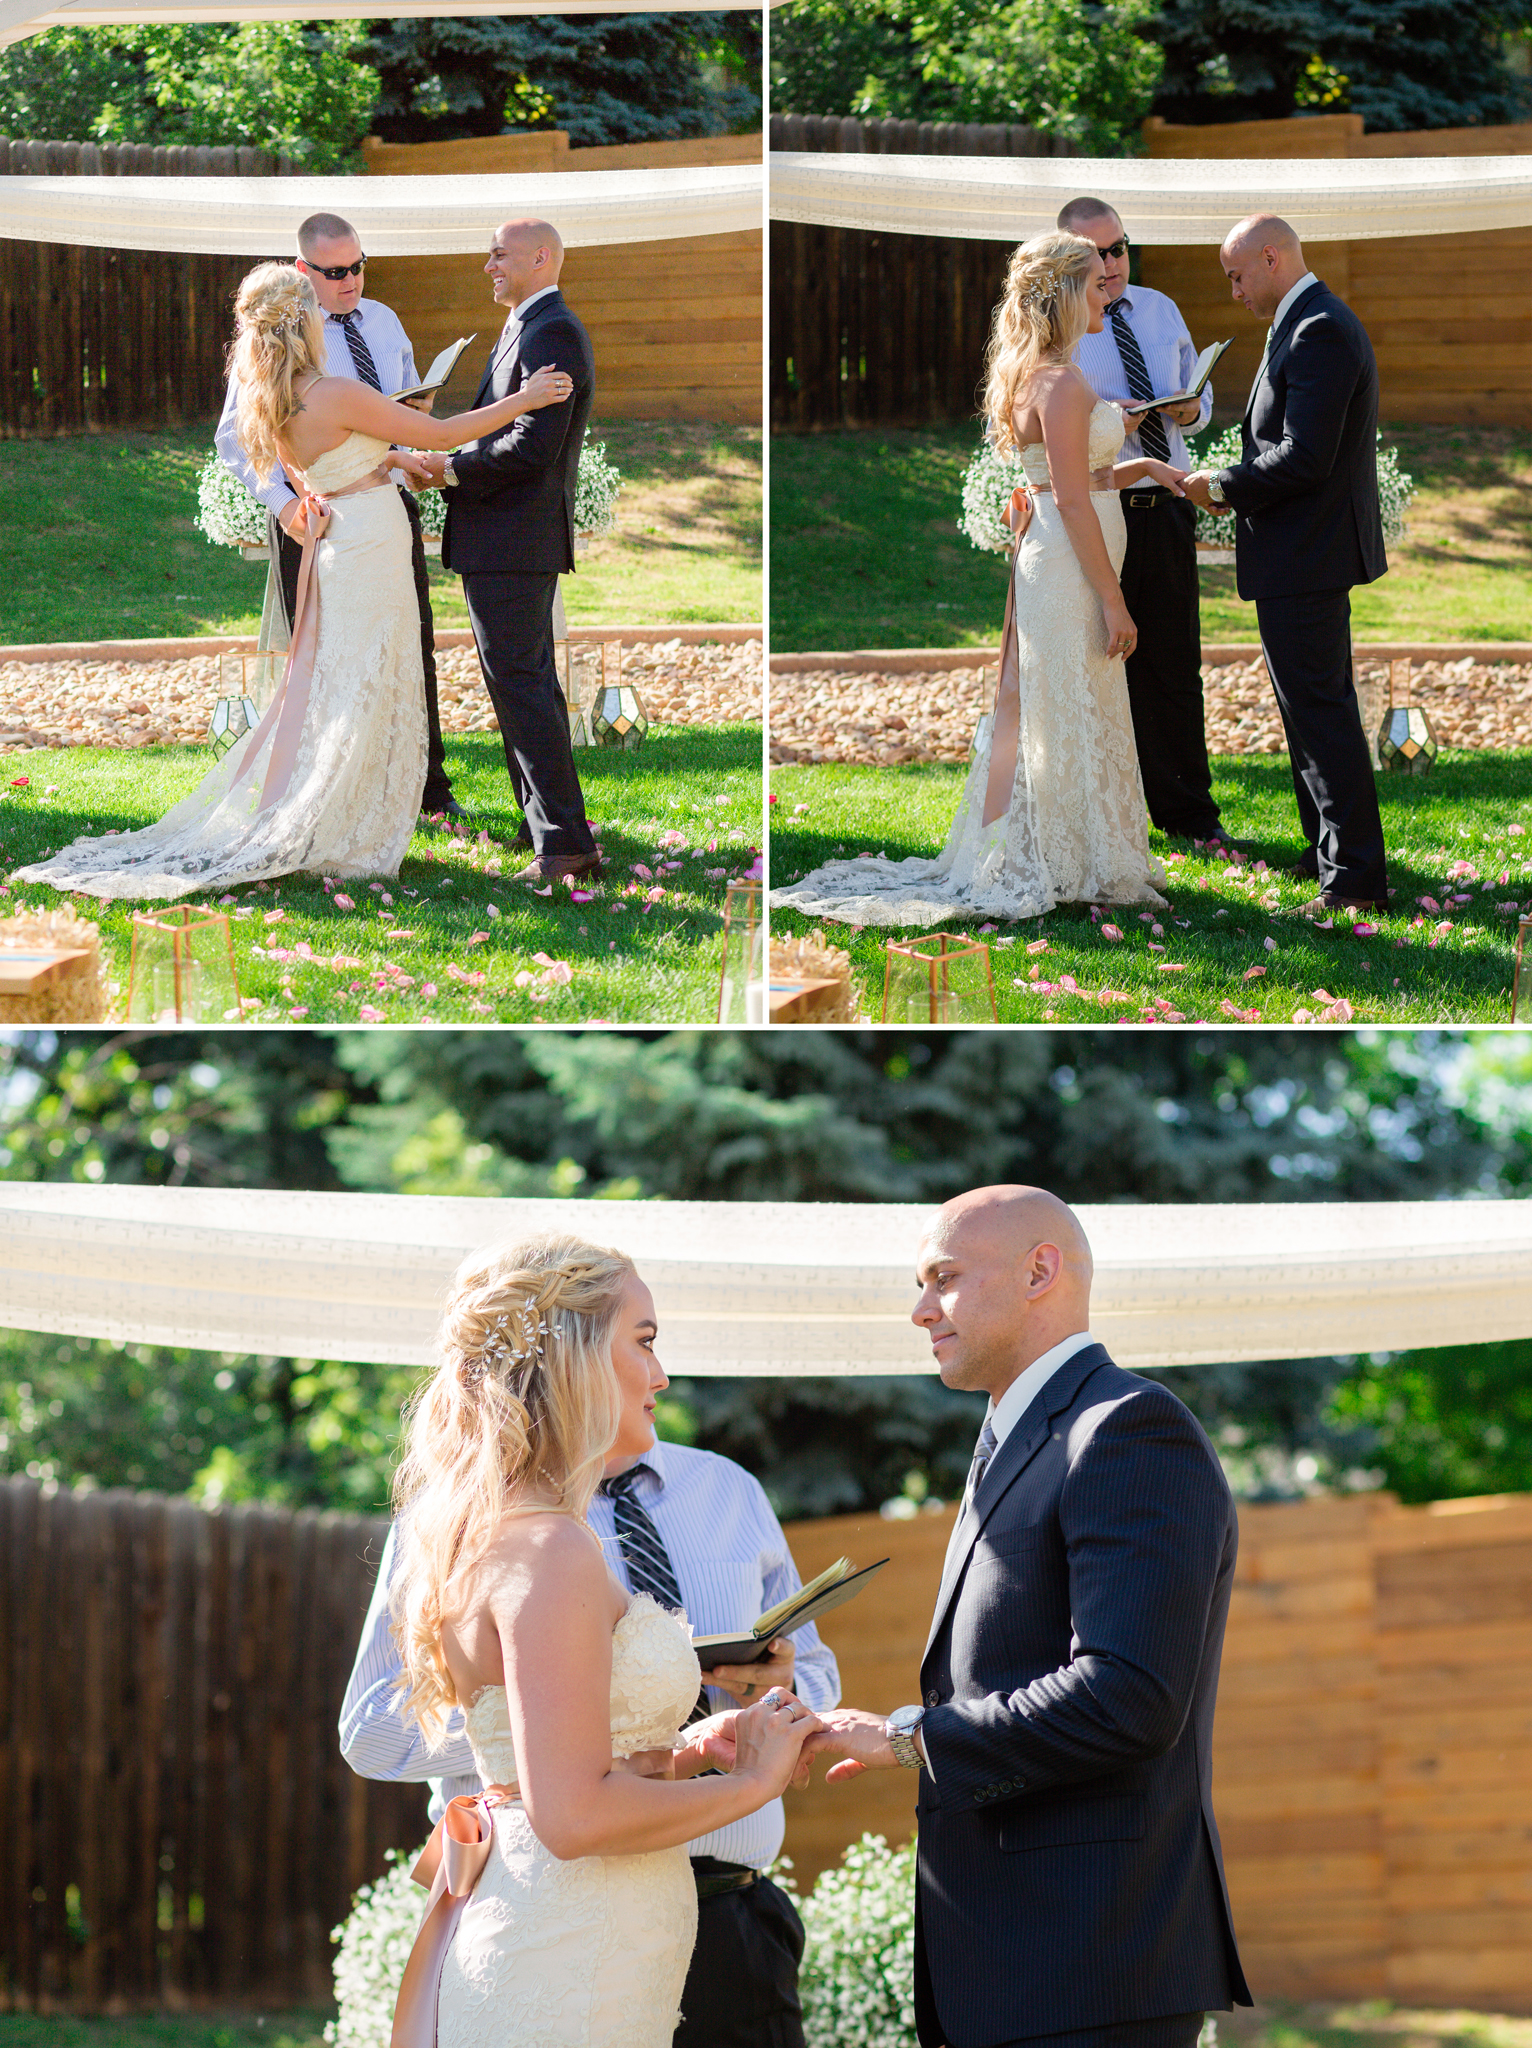 Bride and Groom exchanging rings during their wedding ceremony. Kyley & Brian's Boulder Backyard Wedding and The Mediterranean Restaurant Reception by Colorado Wedding Photographer, Jennifer Garza. Colorado Wedding Photographer, Colorado Wedding Photography, Colorado Top Wedding Photographer, Boulder Wedding Photographer, Boulder Wedding, Backyard Wedding Photographer, Backyard Wedding, The Mediterranean Restaurant, The Med, The Med Reception, Intimate Wedding, Small Intimate Wedding, Rocky Mountain Wedding, Rocky Mountain Bride, Colorado Bride, Here Comes the Bride, Couples Goals, Brides of Colorado